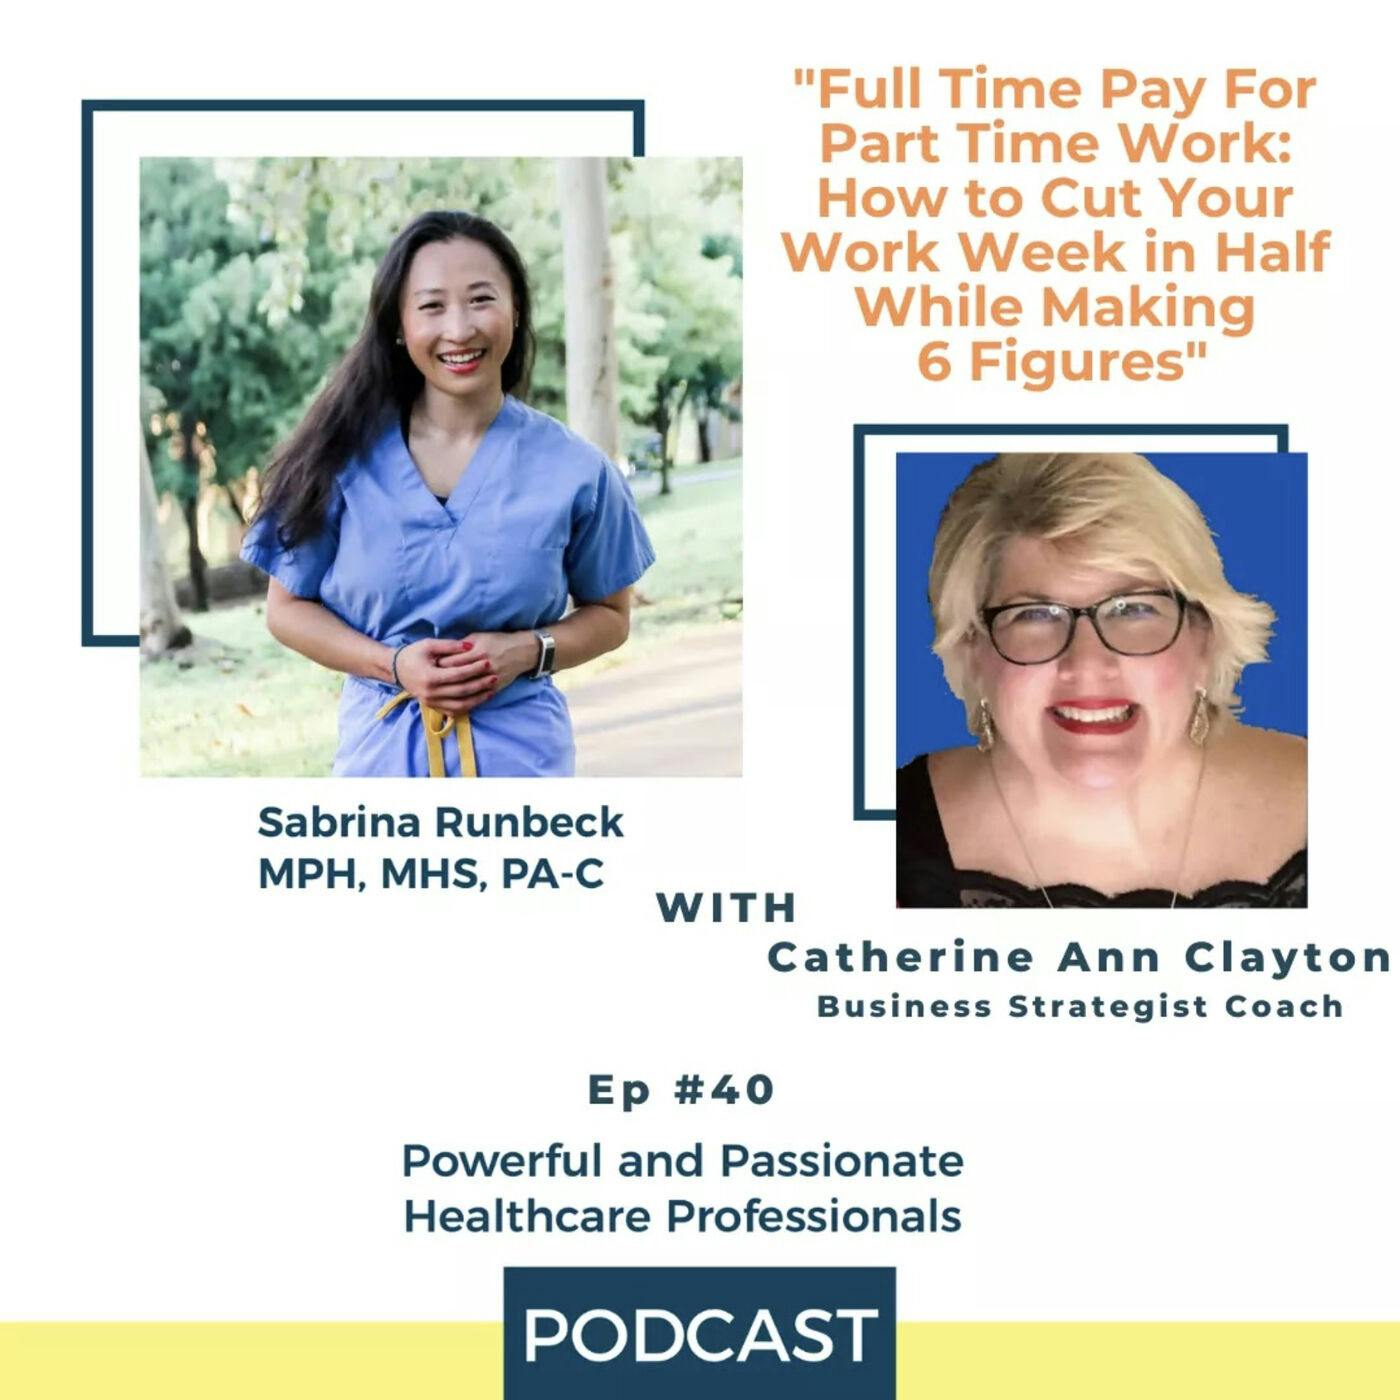 Ep 40 – Time Pay For Part Time Work: How to Cut Your Work Week in Half While Making 6 Figures with Catherine Ann Clayton